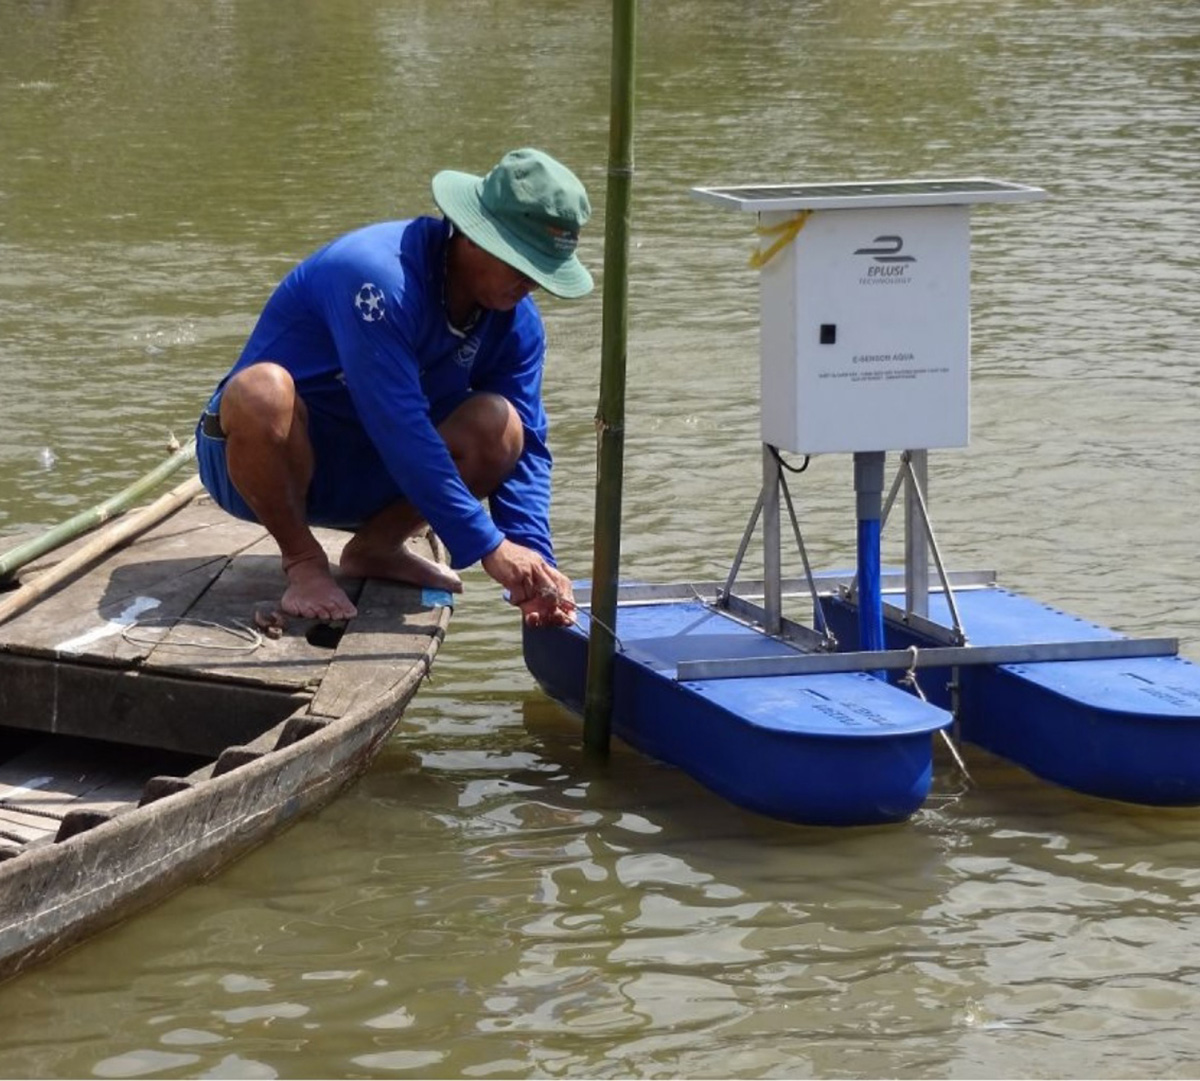 Can Tho University and local governments are monitoring water quality to reduce pollution for sustainable aquaculture in the Mekong Delta with the support of training and mentoring from Aus4Innovation’s Science Commercialization & Partnerships Team.